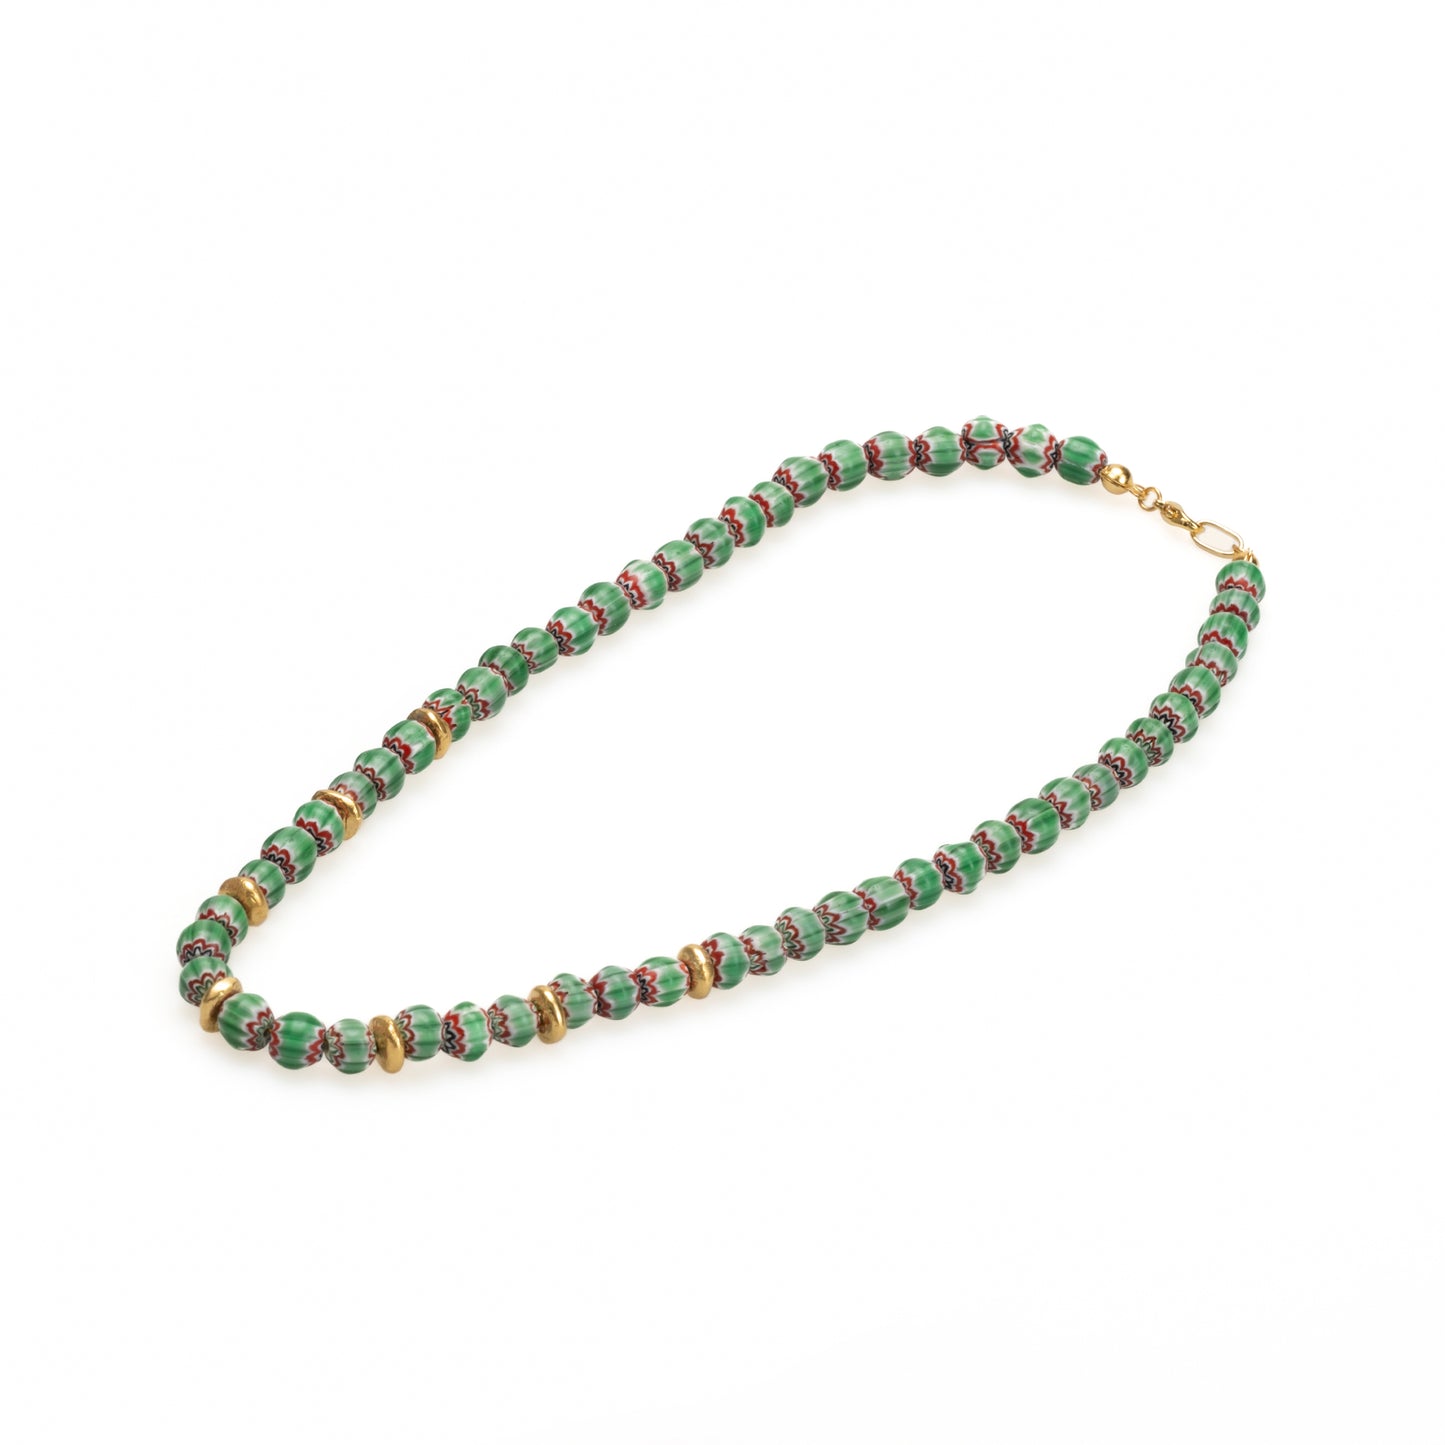 Beaded Murano Glass Zulu Necklace with Green and Blue Beads